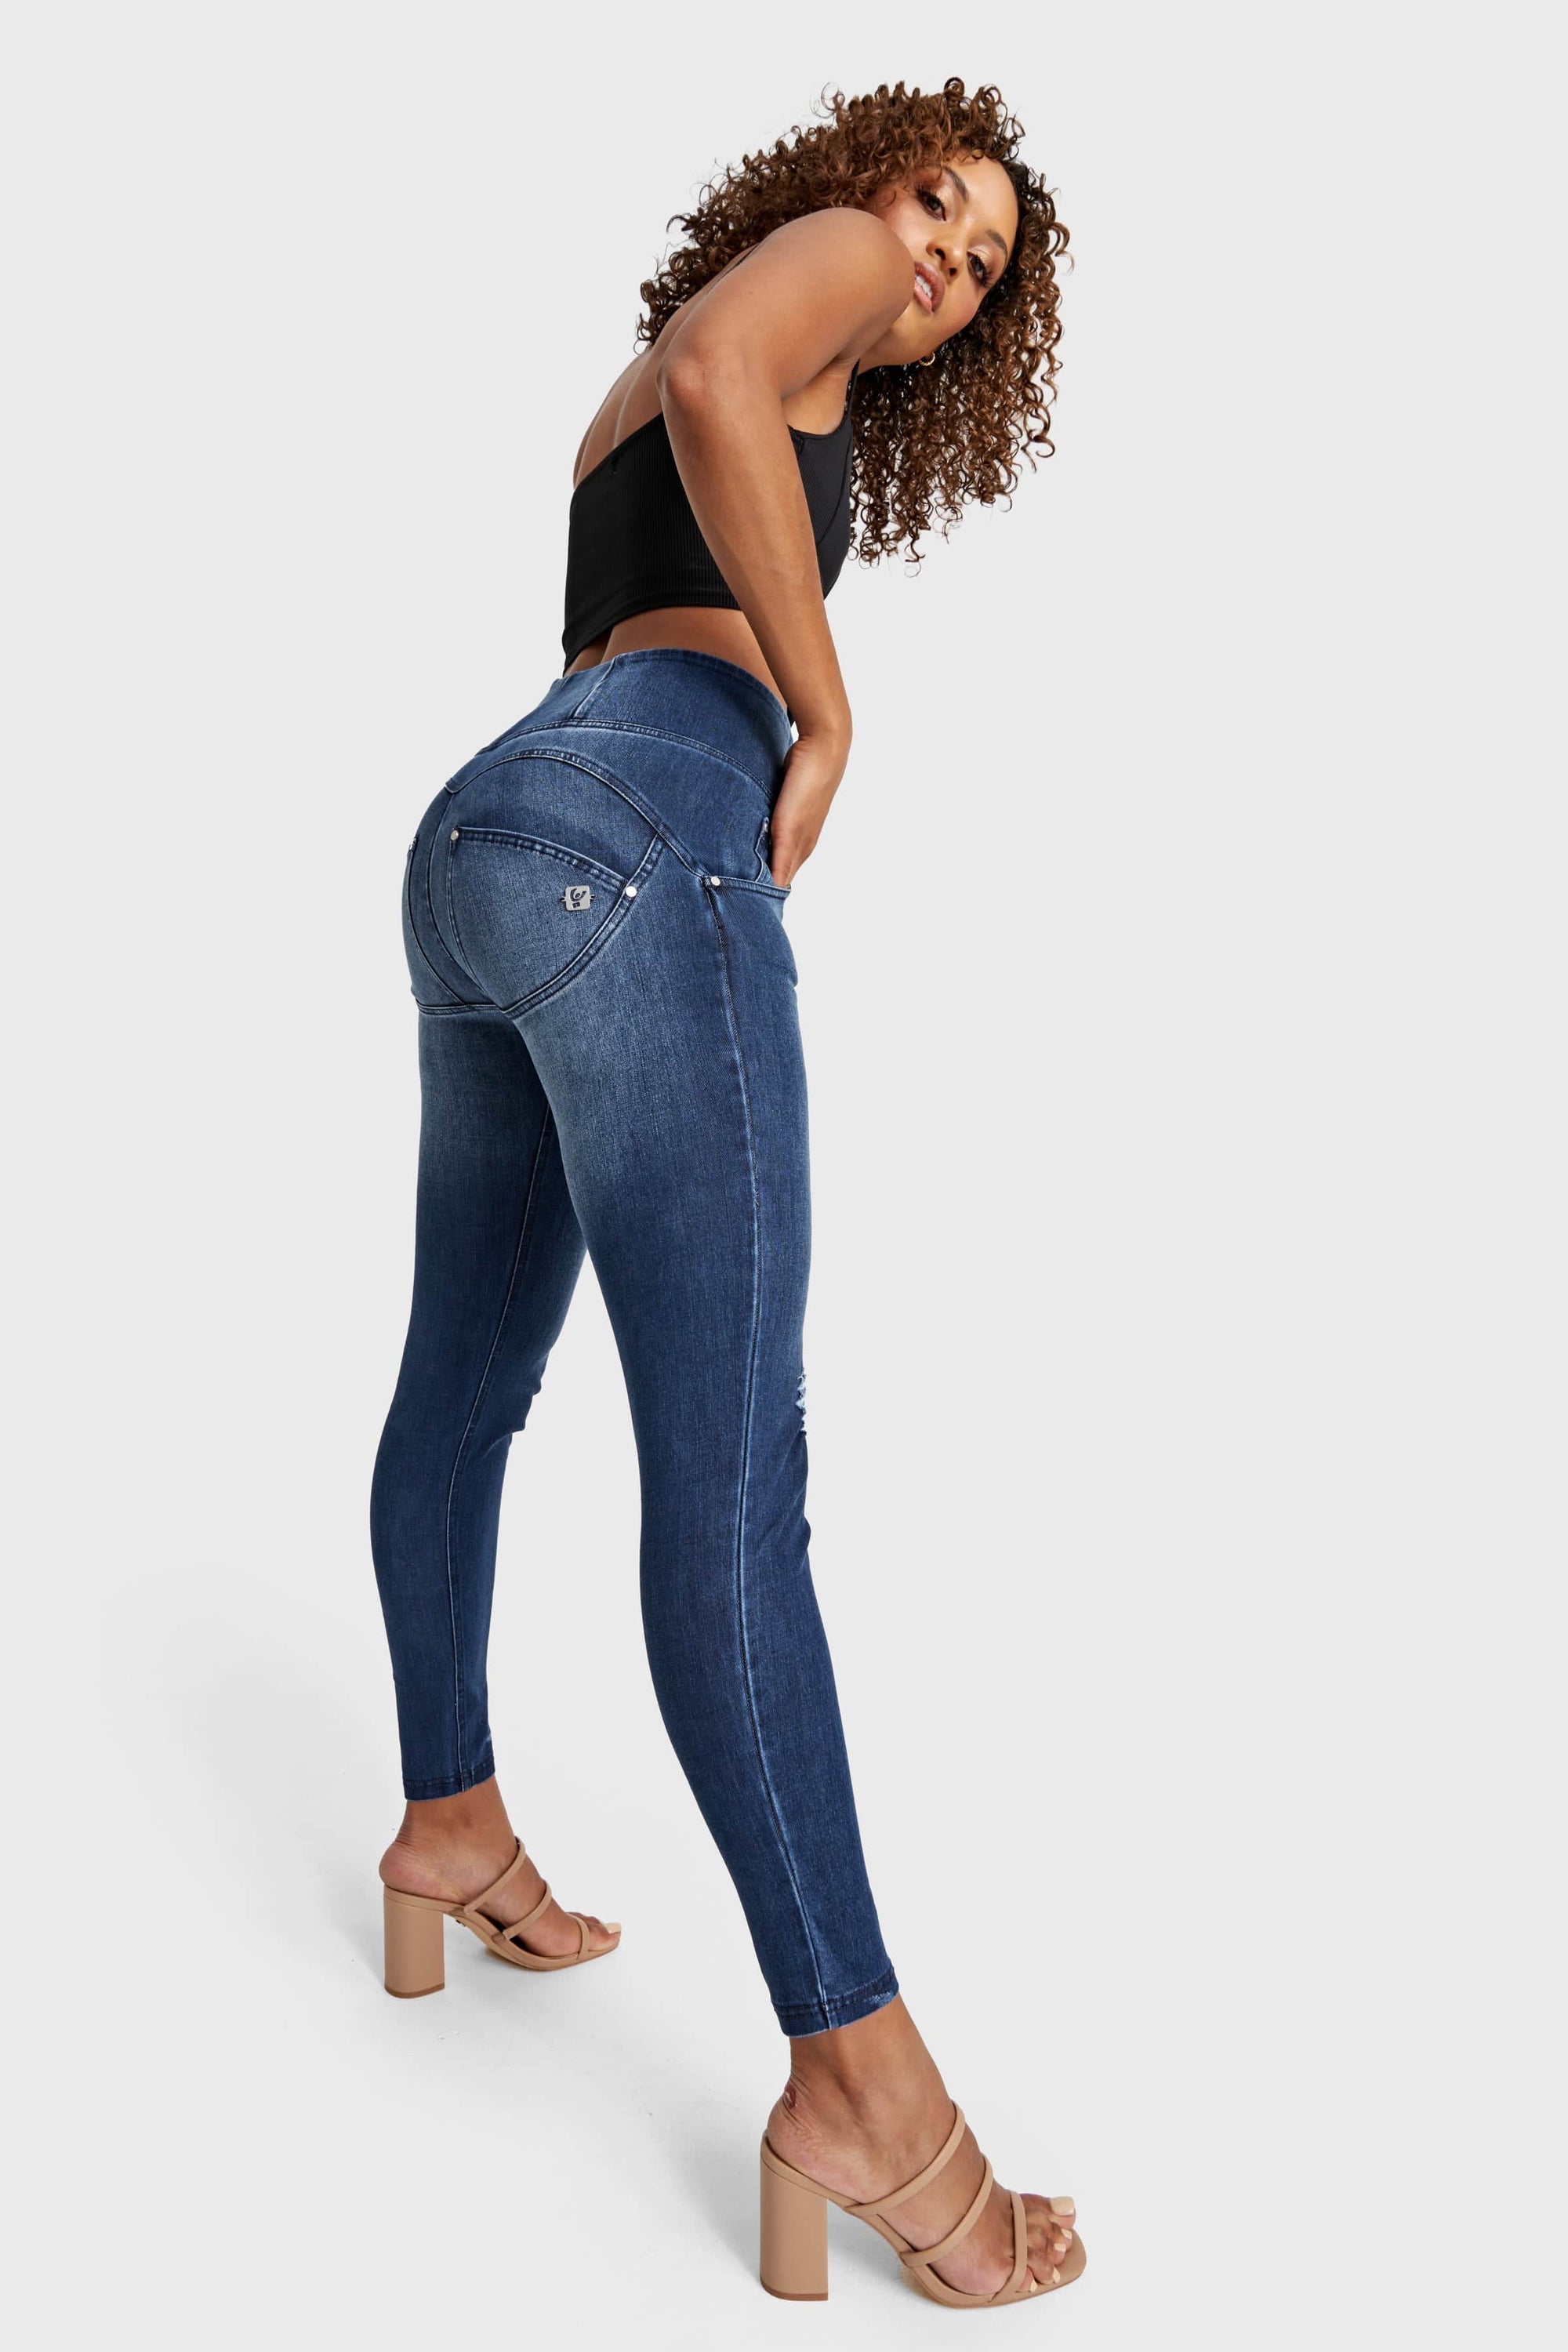 WR.UP® Snug Distressed Jeans - High Waisted - Full Length - Dark Blue + Blue Stitching 7